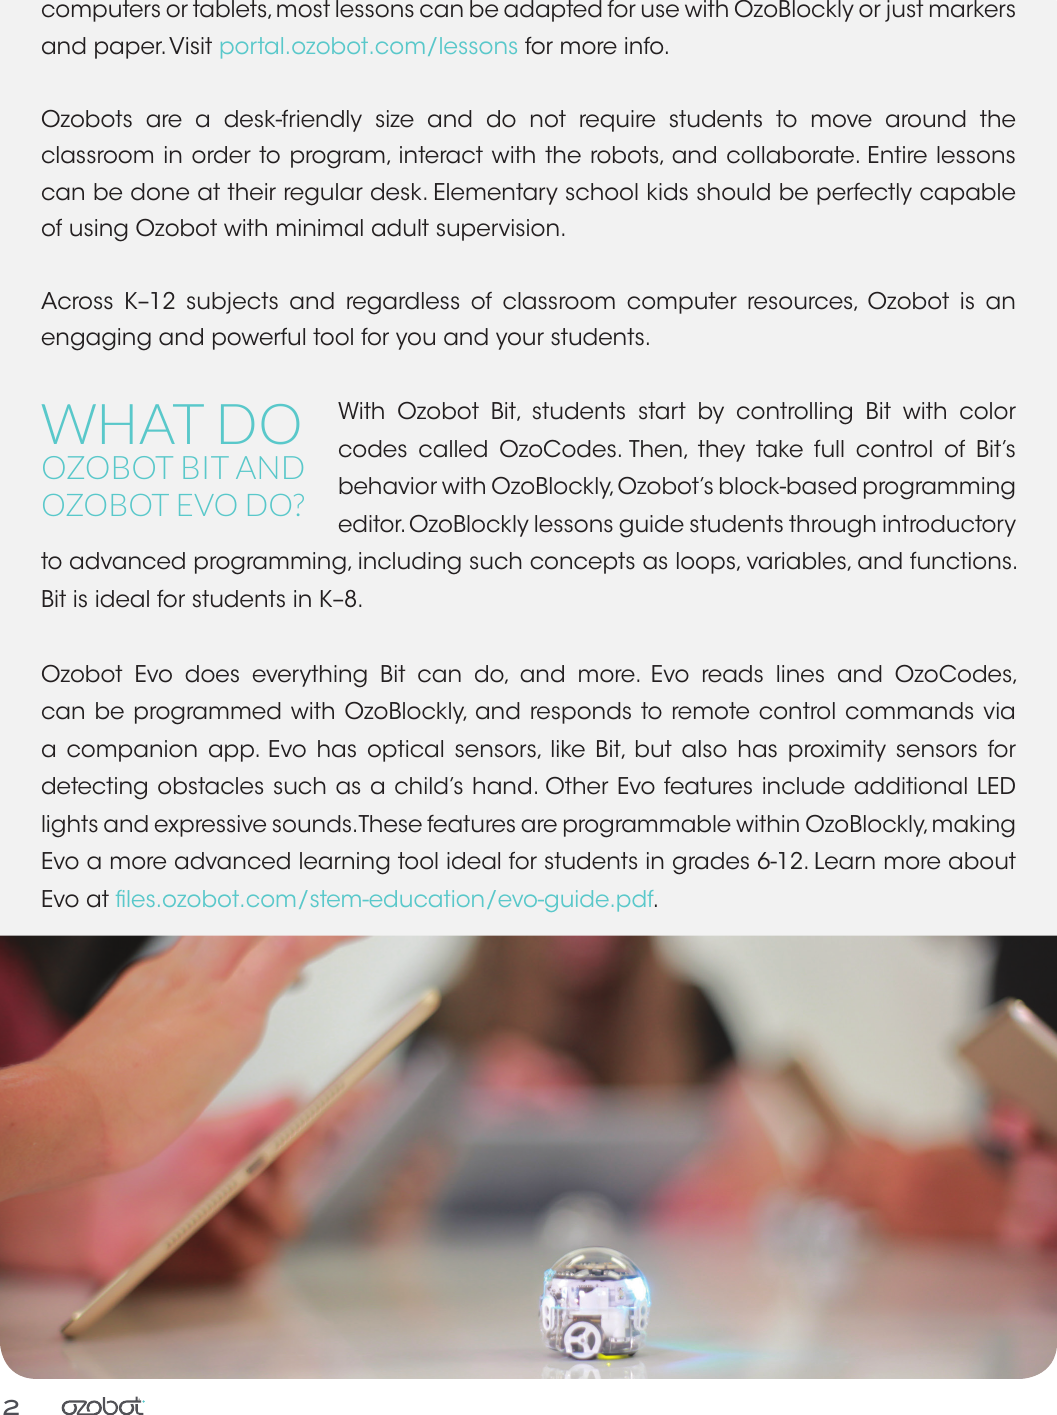 Page 2 of 8 - Ozobot-educators-guide